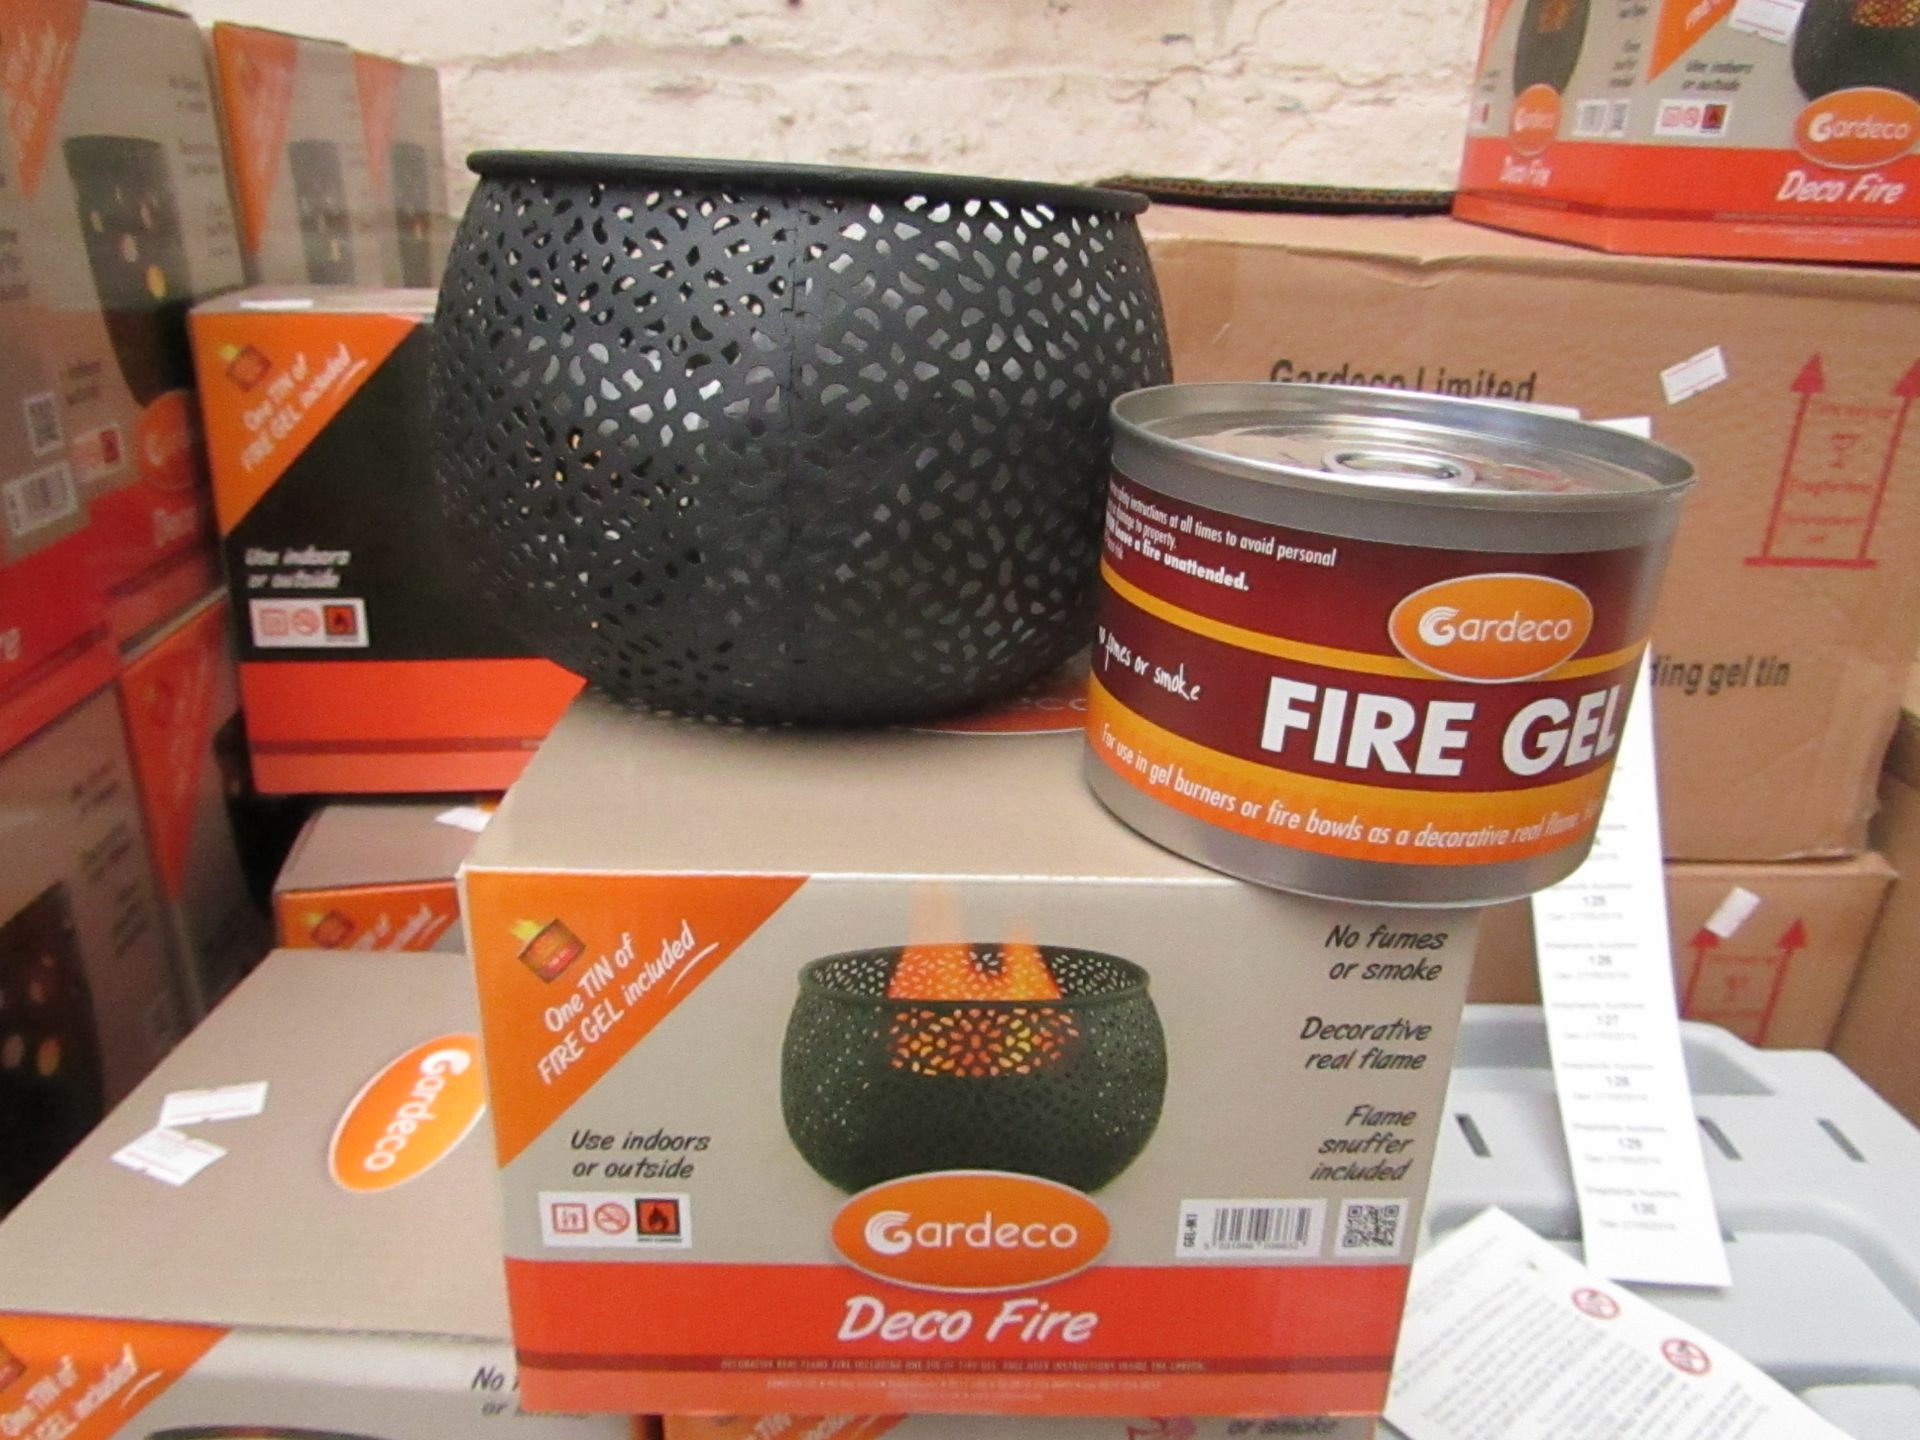 Gardeco Fire Decorative Real flame Fire with 1 tin of Fire Gel new & packaged